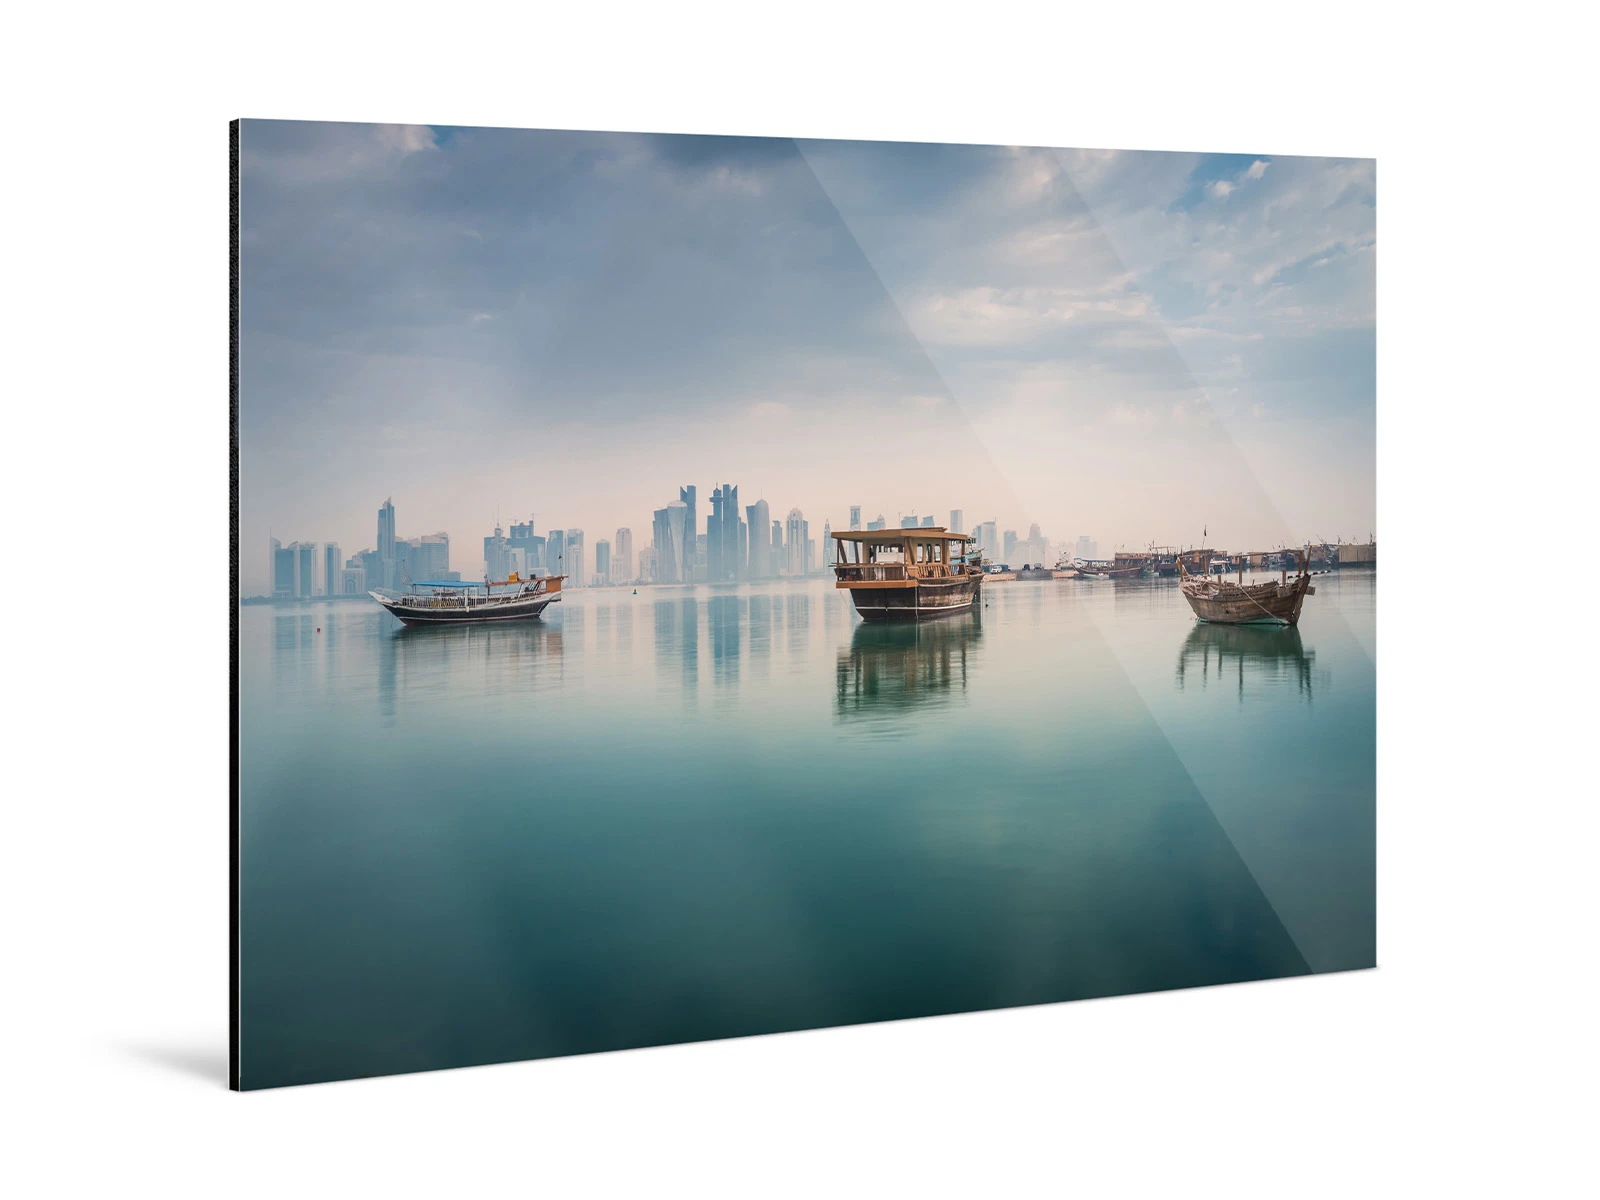 Three boats reflected on the calm sea surface, while in the background is a skyline on a Photo Print On Aluminum Backing.